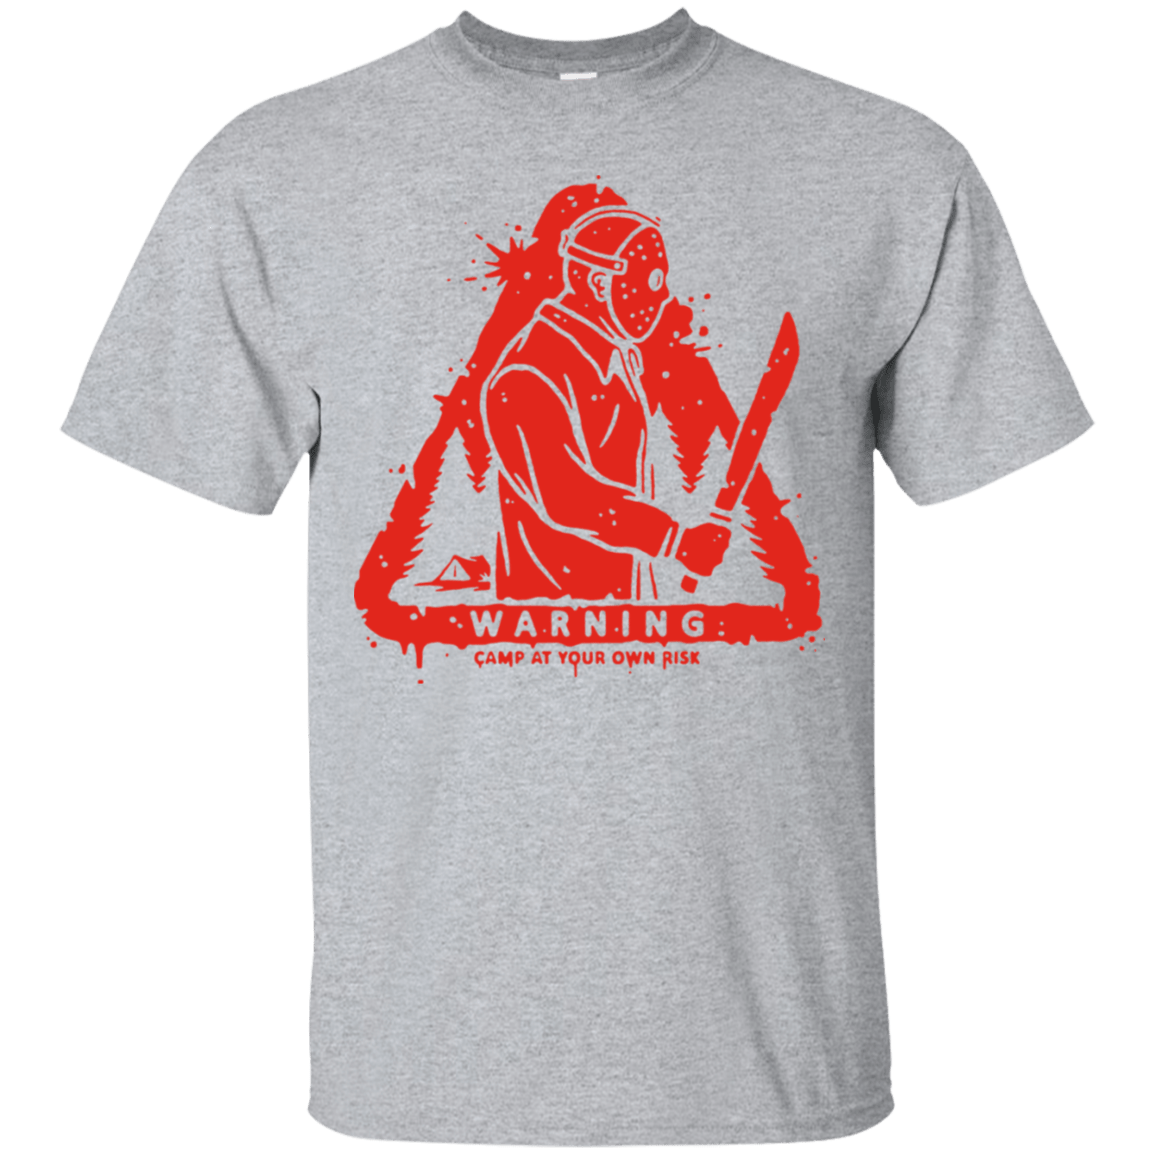 T-Shirts Sport Grey / S Camp at Your Own Risk T-Shirt